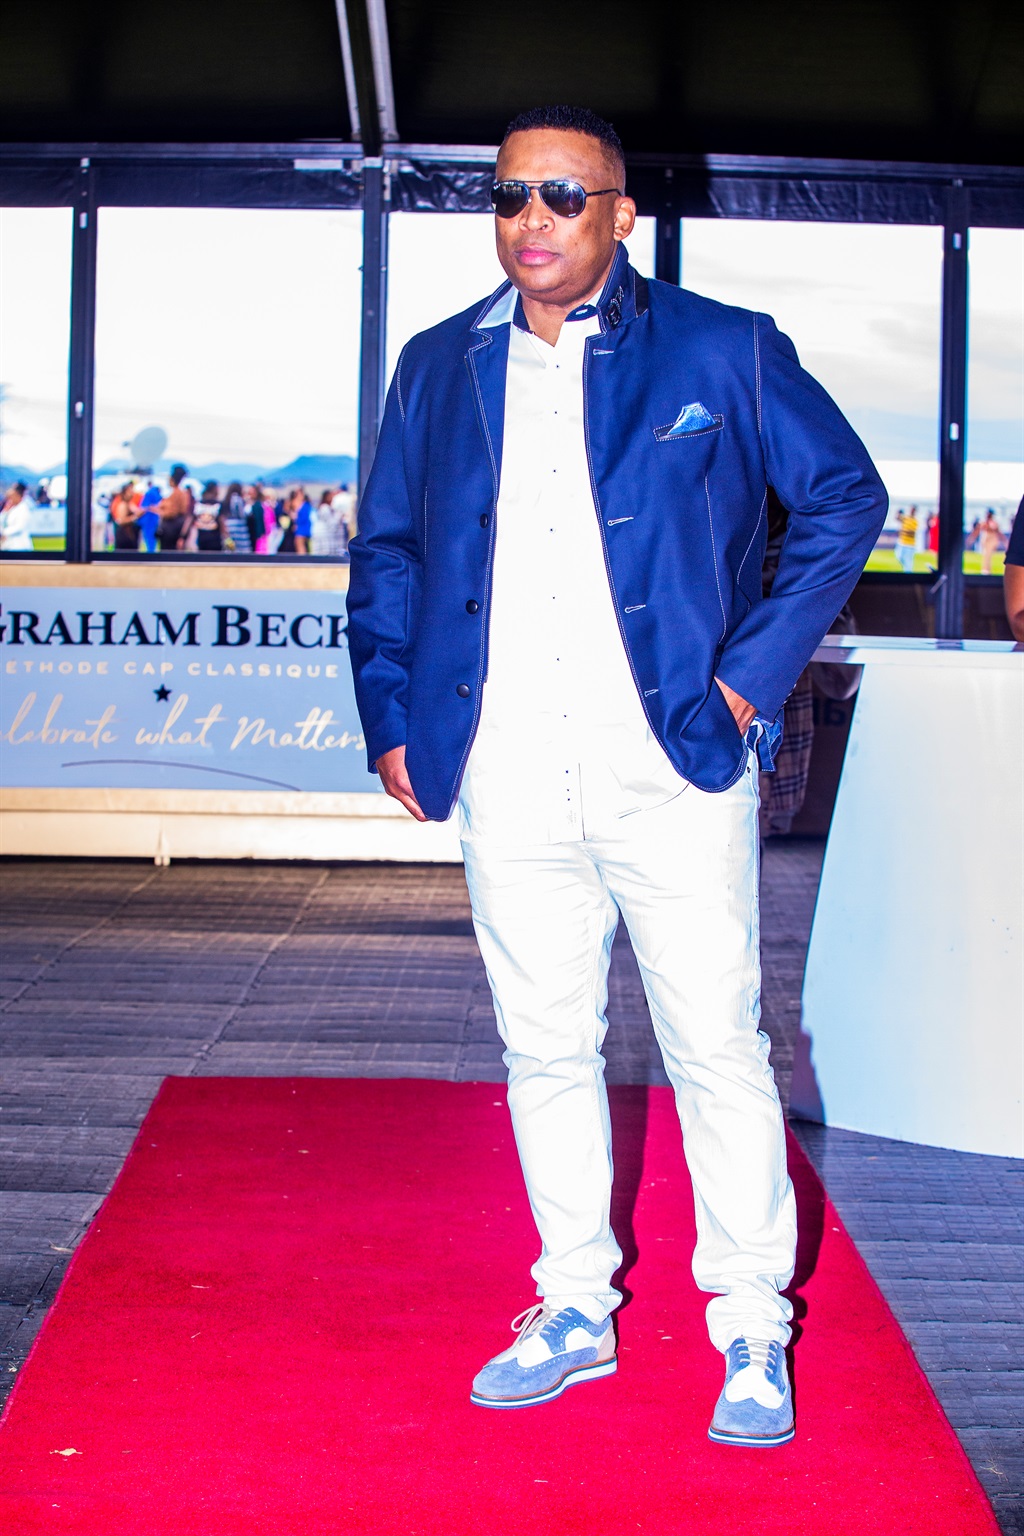 Standard Bank Polo in the Park guests